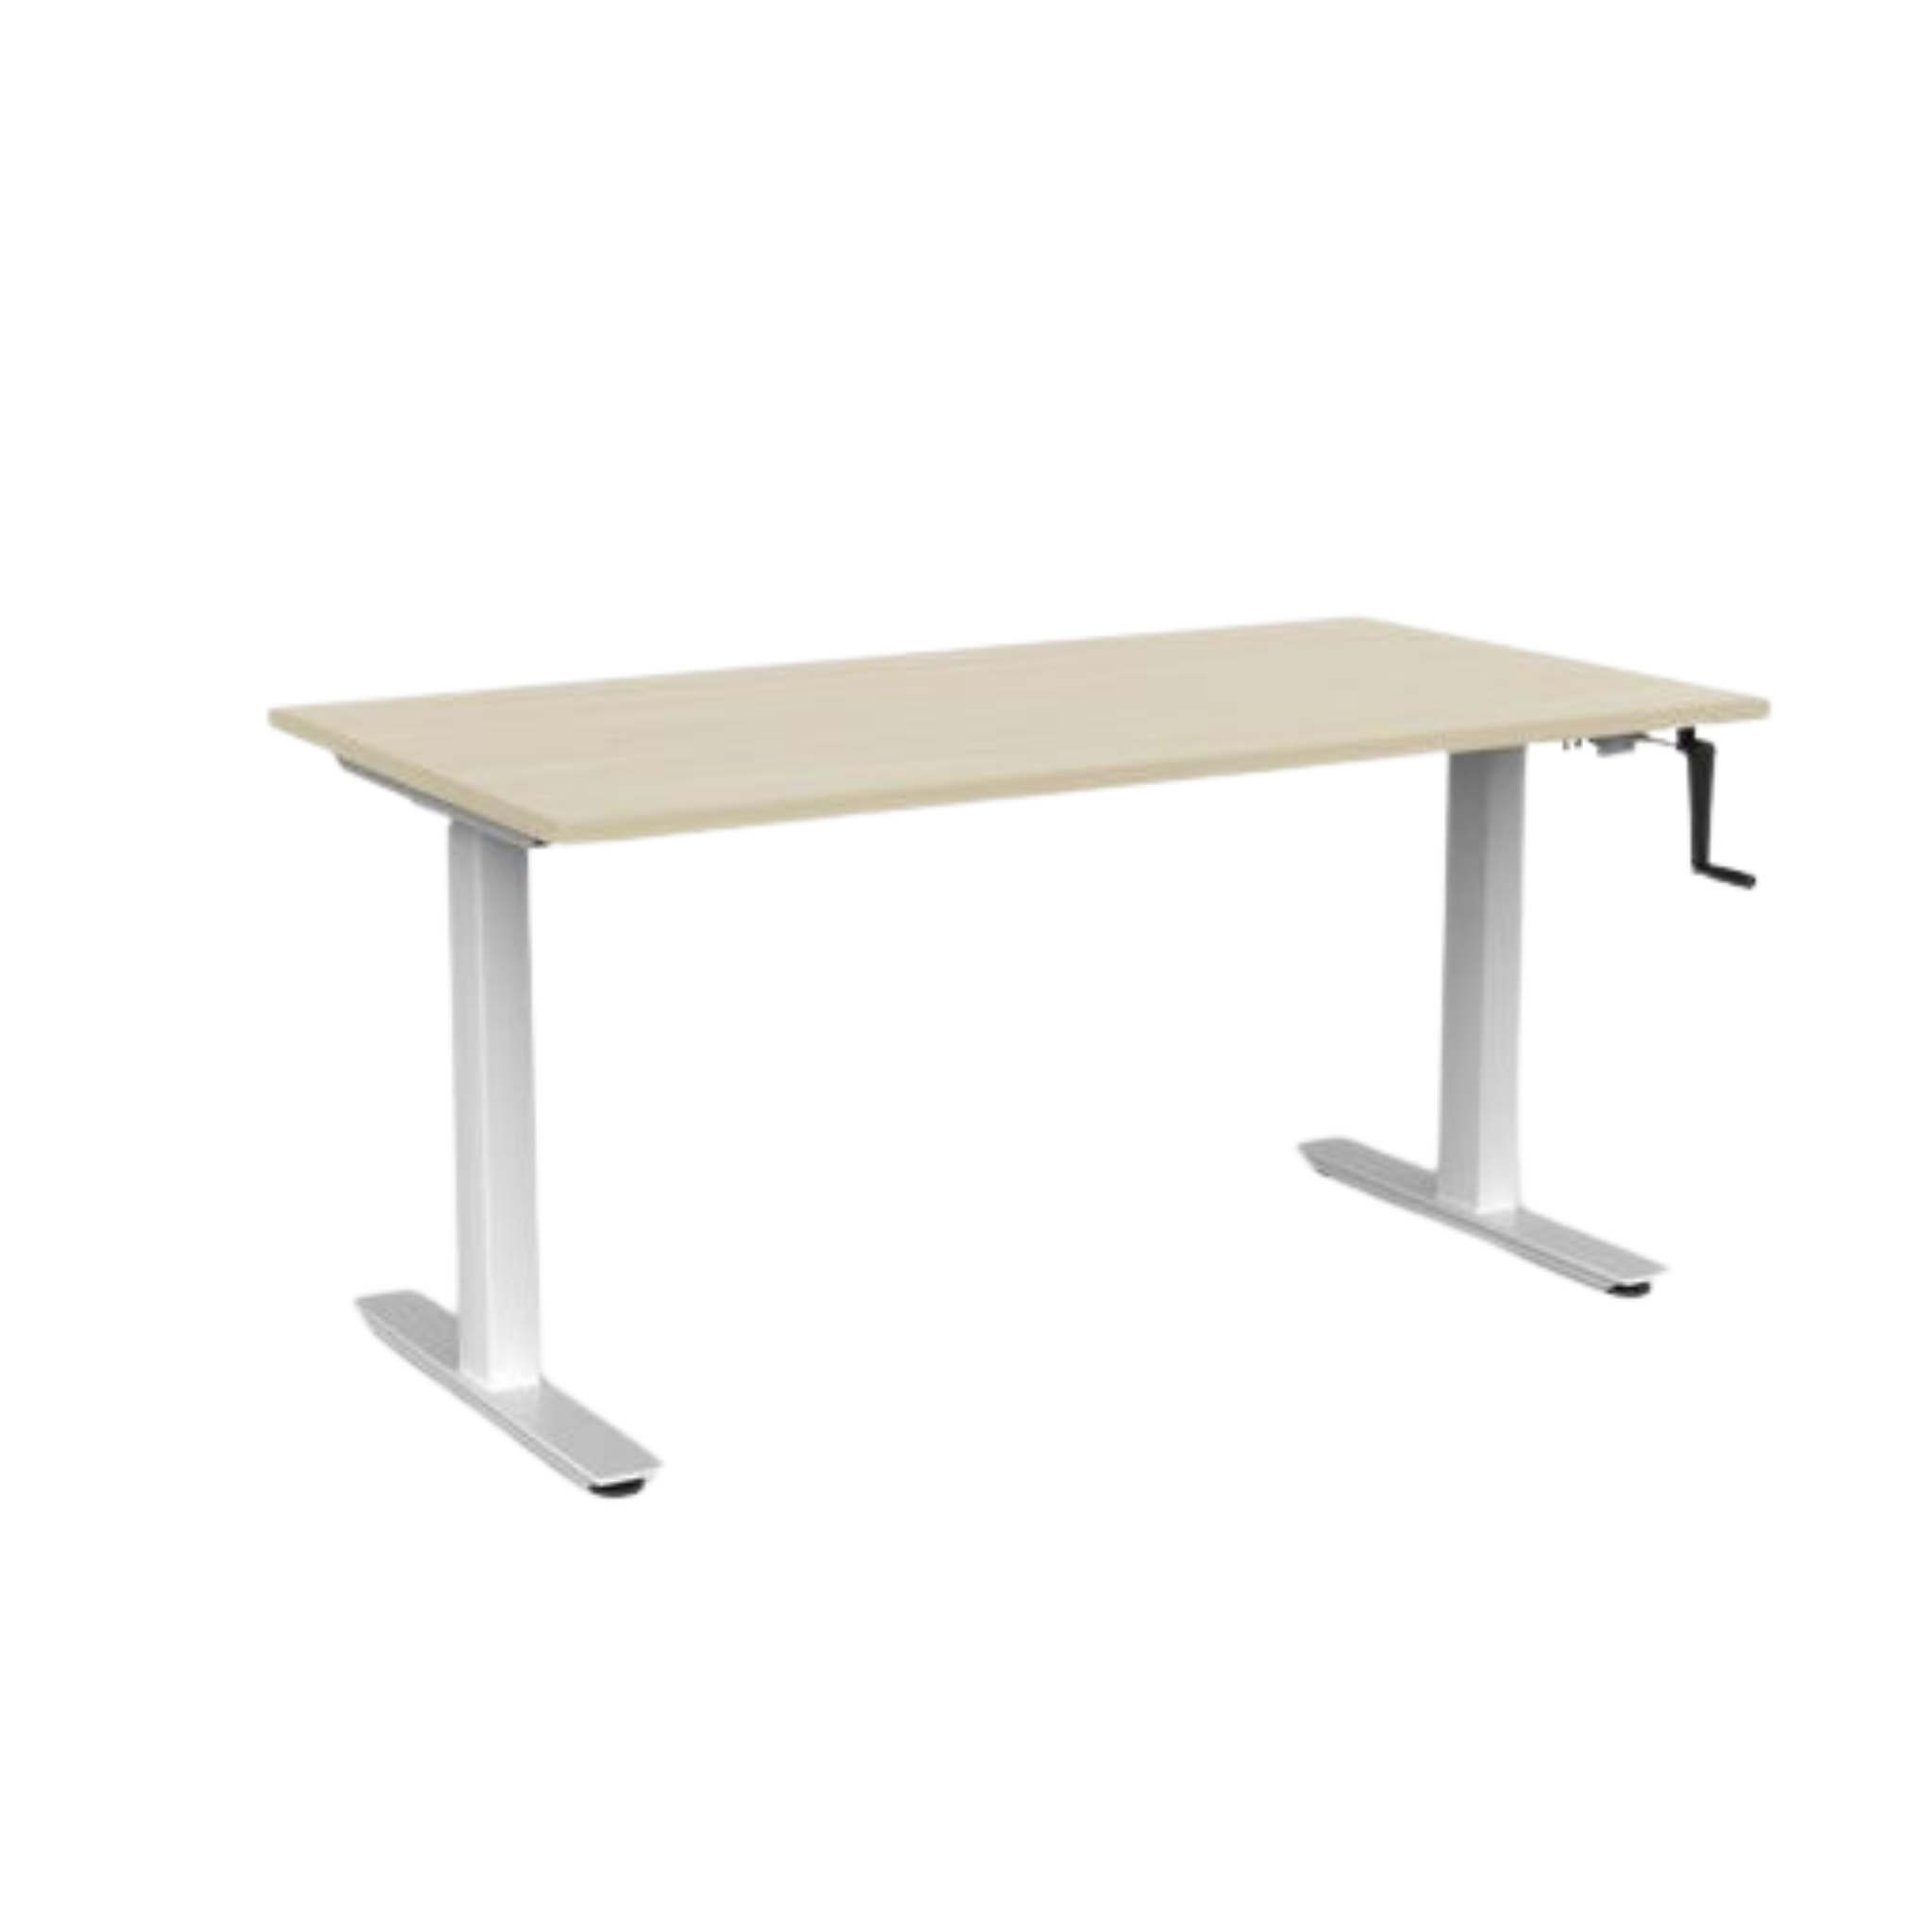 Agile winder sit to stand desk with white frame and nordic maple top